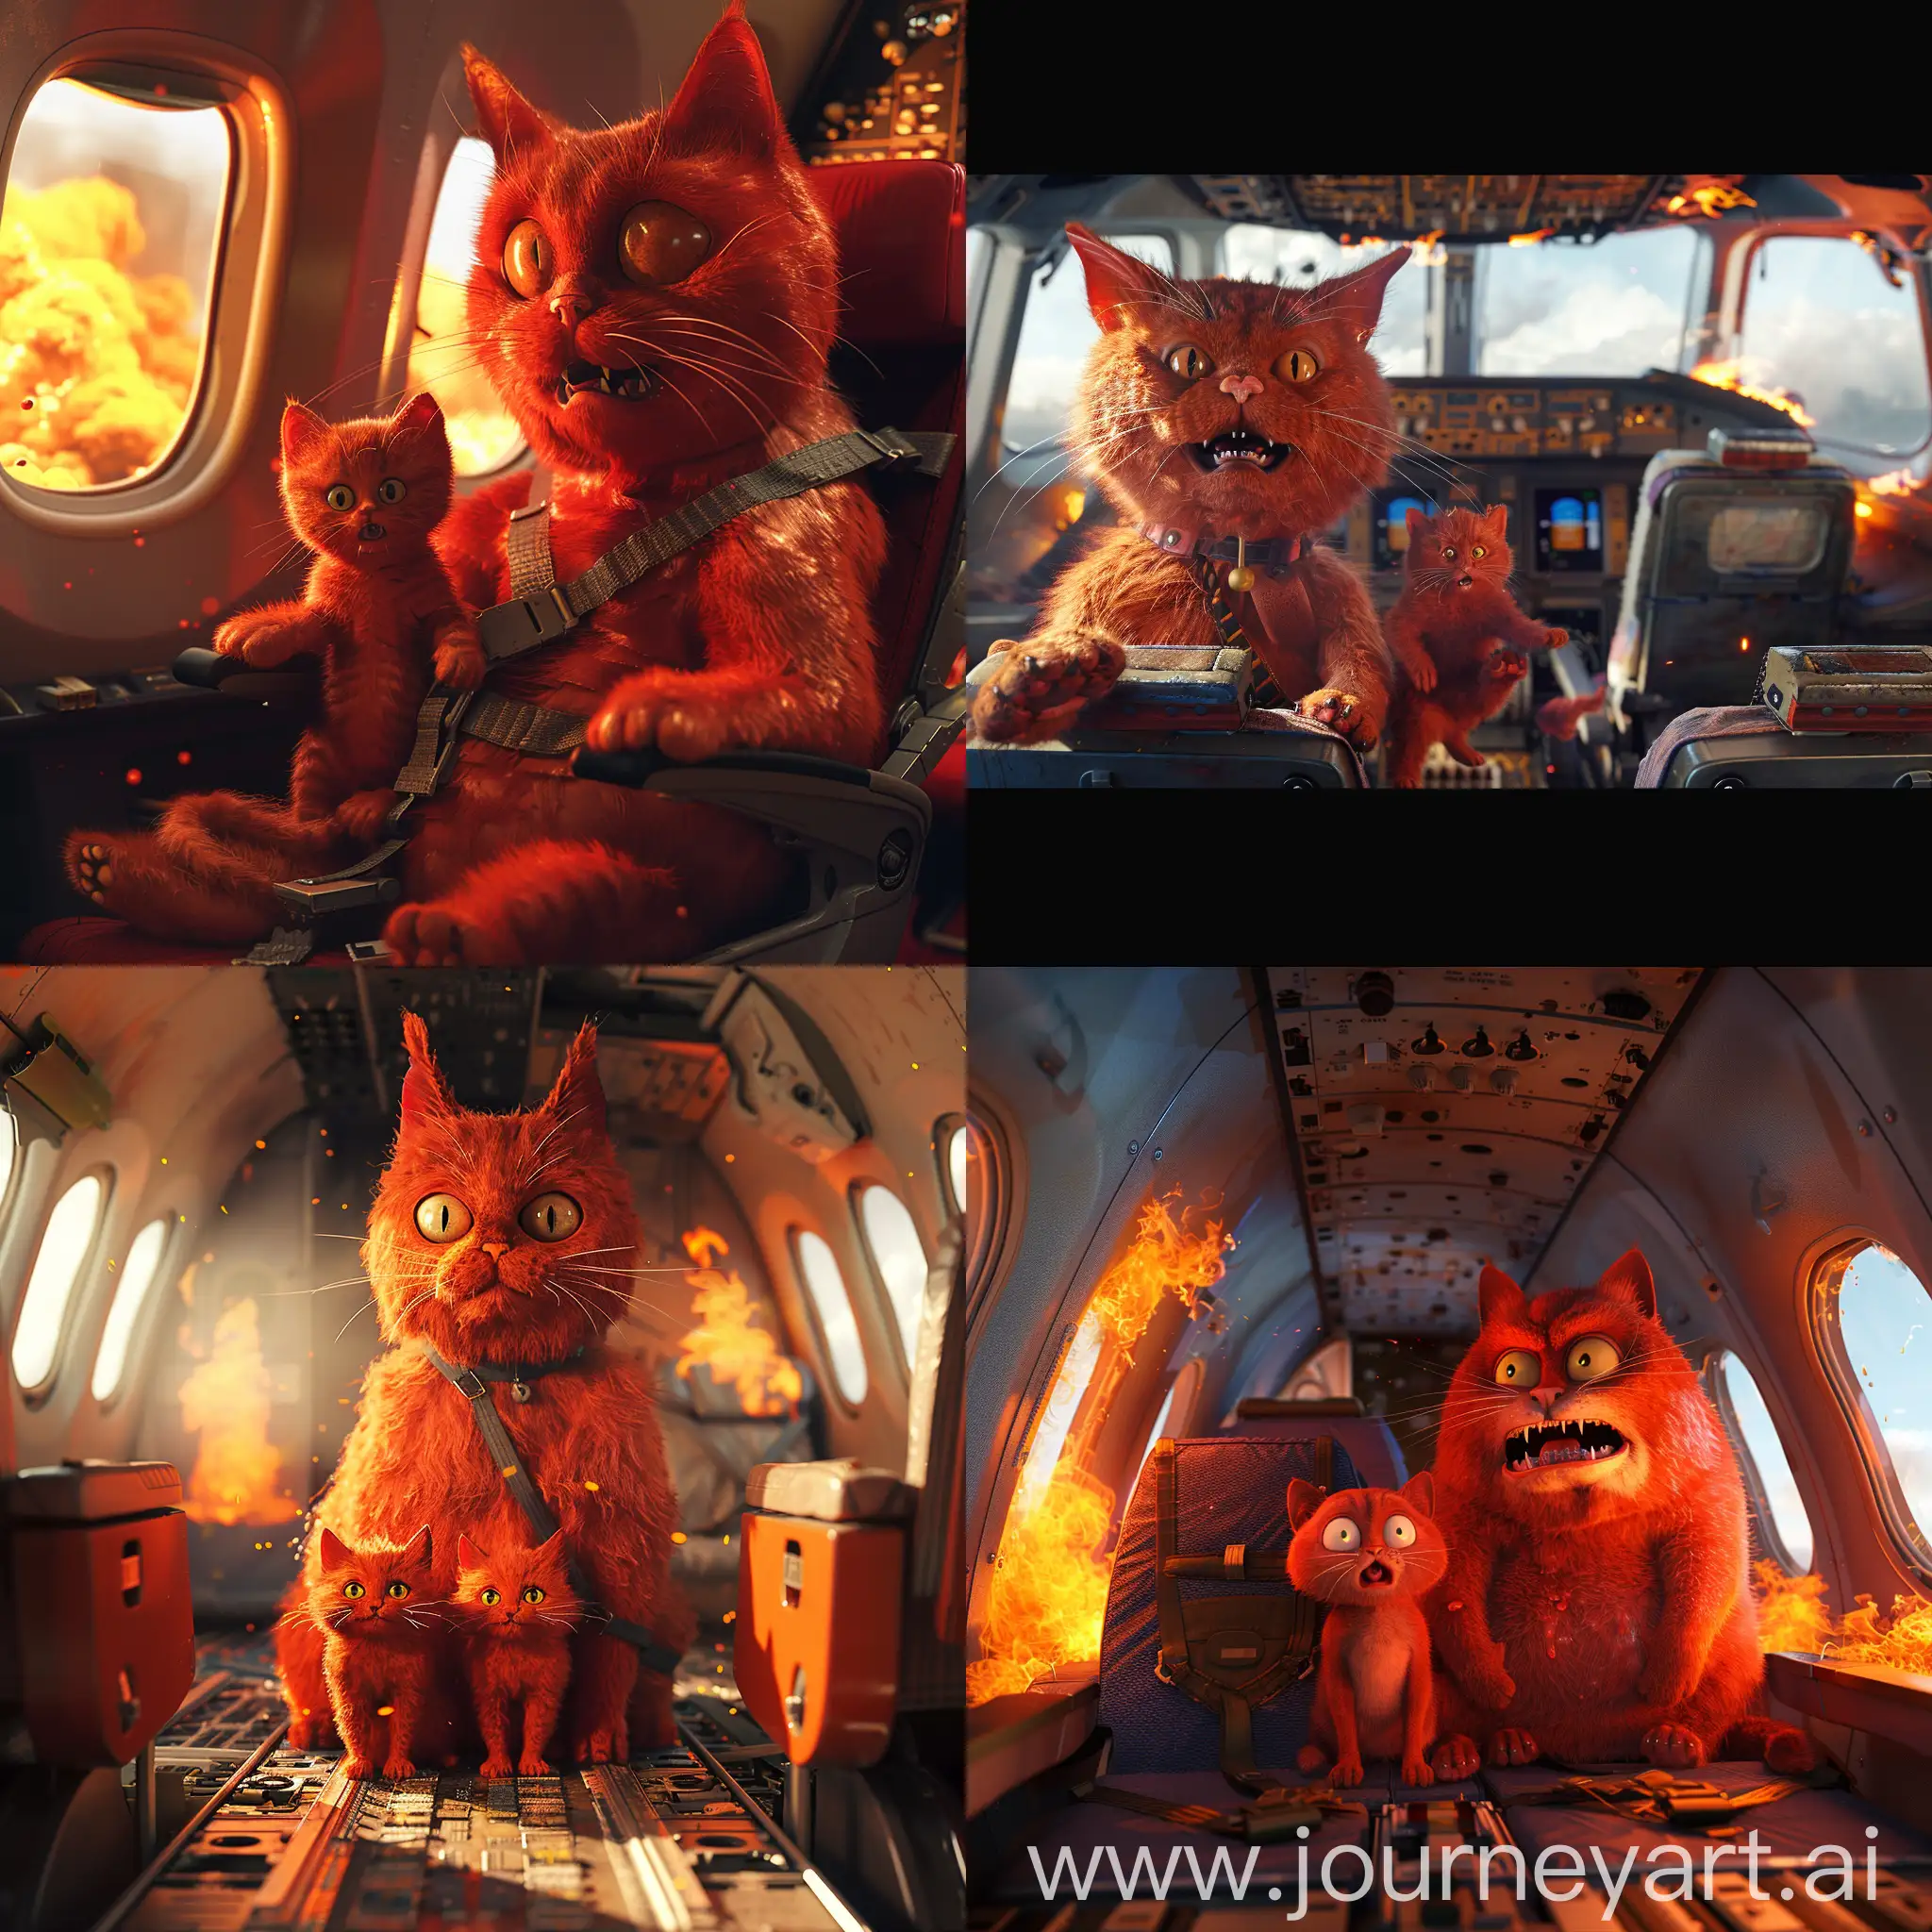 Inside a passenger plane sits a pumped-up big red cat and his little red little kitten, they are terrified because everything is on fire (Photorealistic Animation) horizontal photo 9 by 16